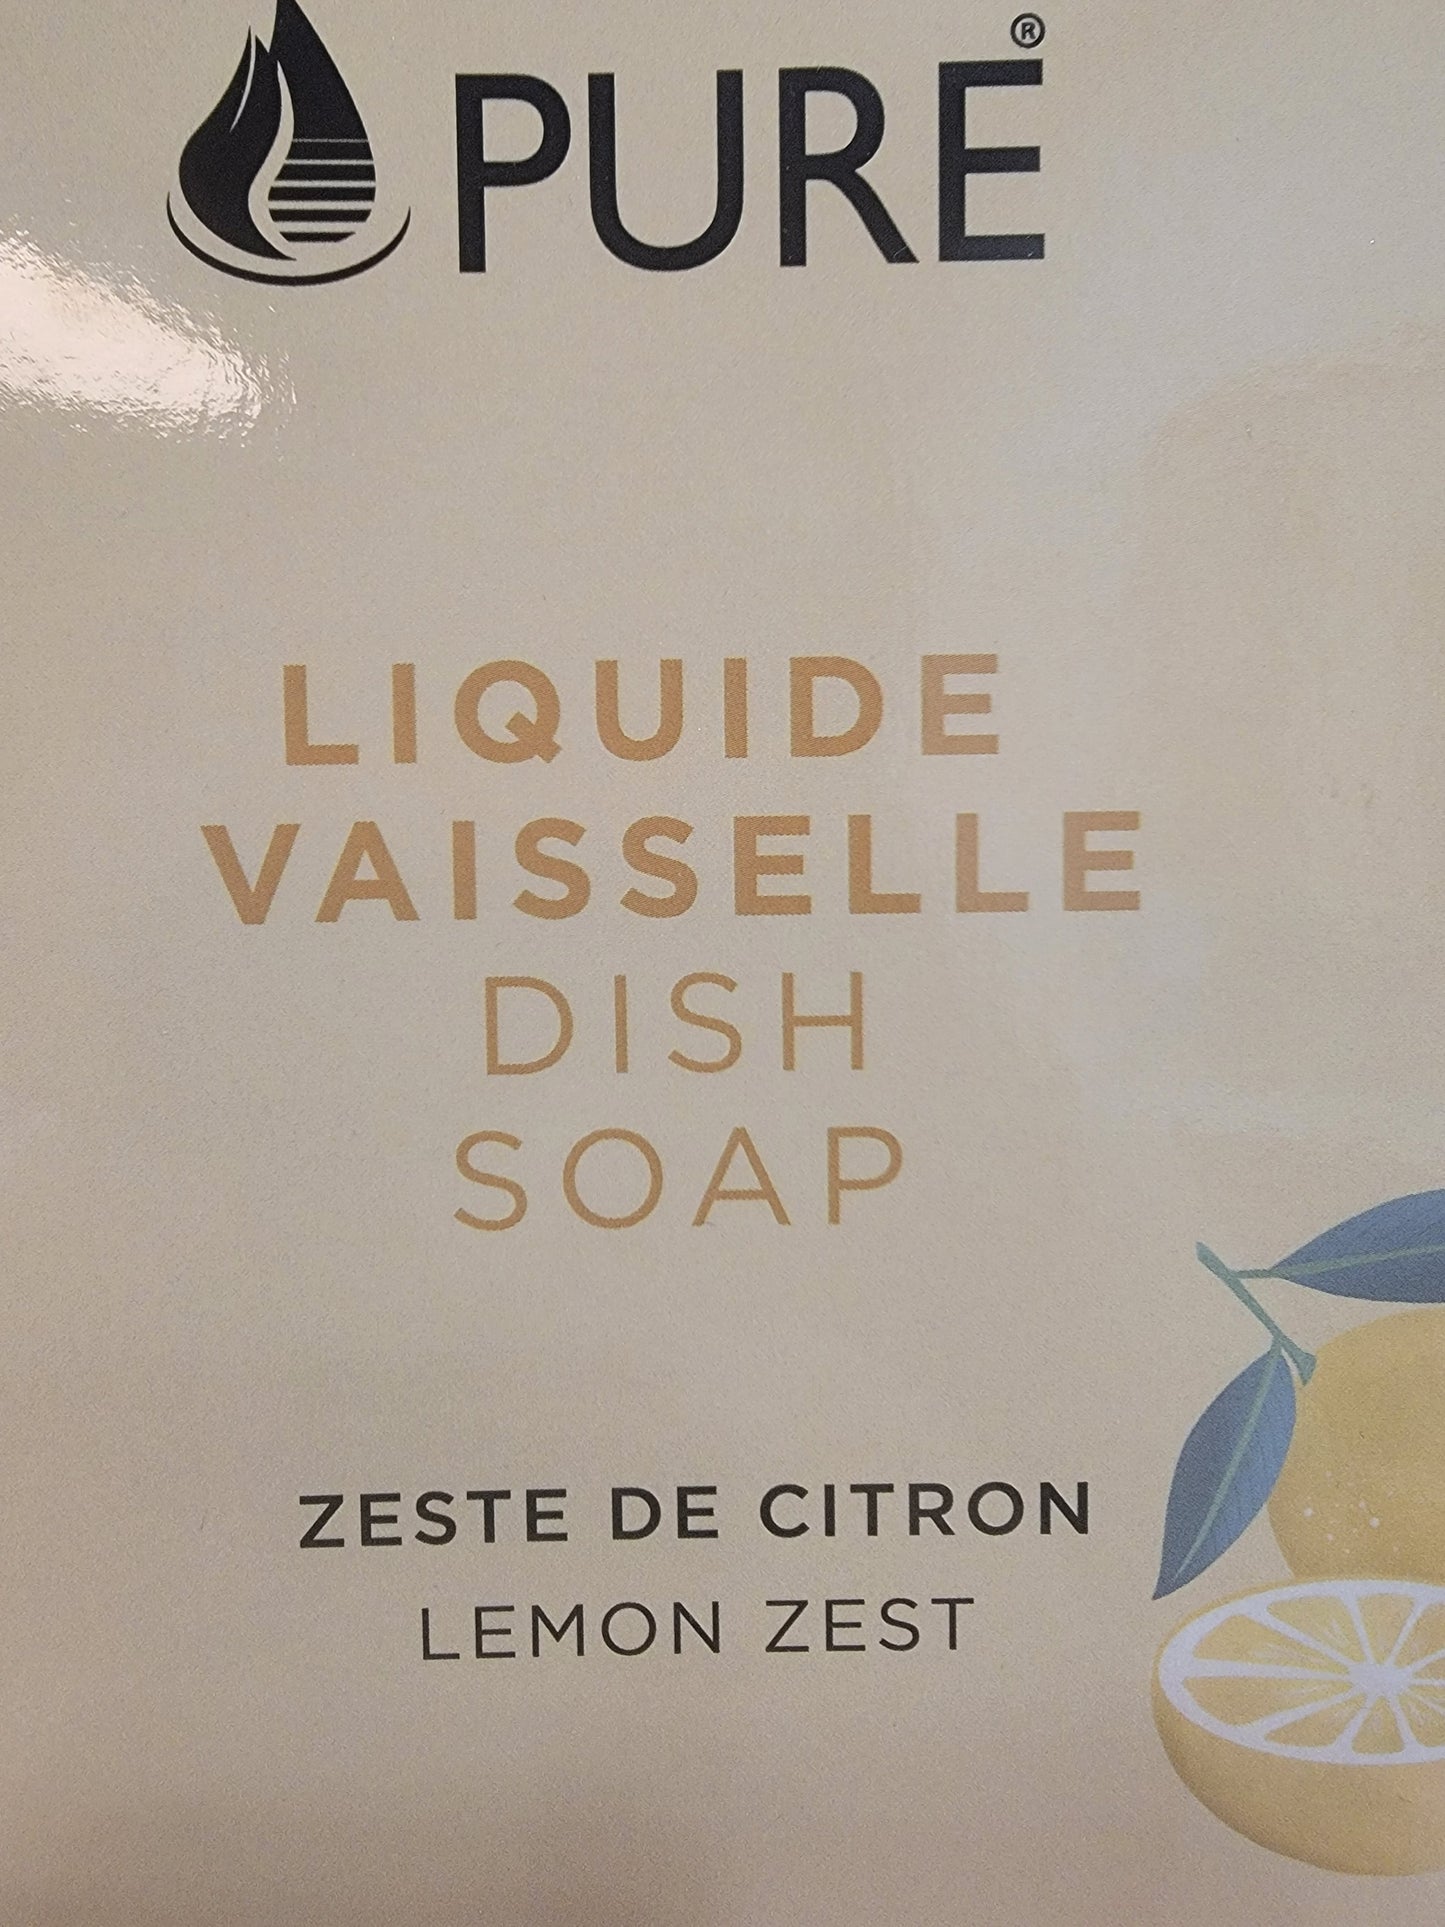 Almond Blossom , Mango, Lemon Zest or Unscented Dish Soap by Pure